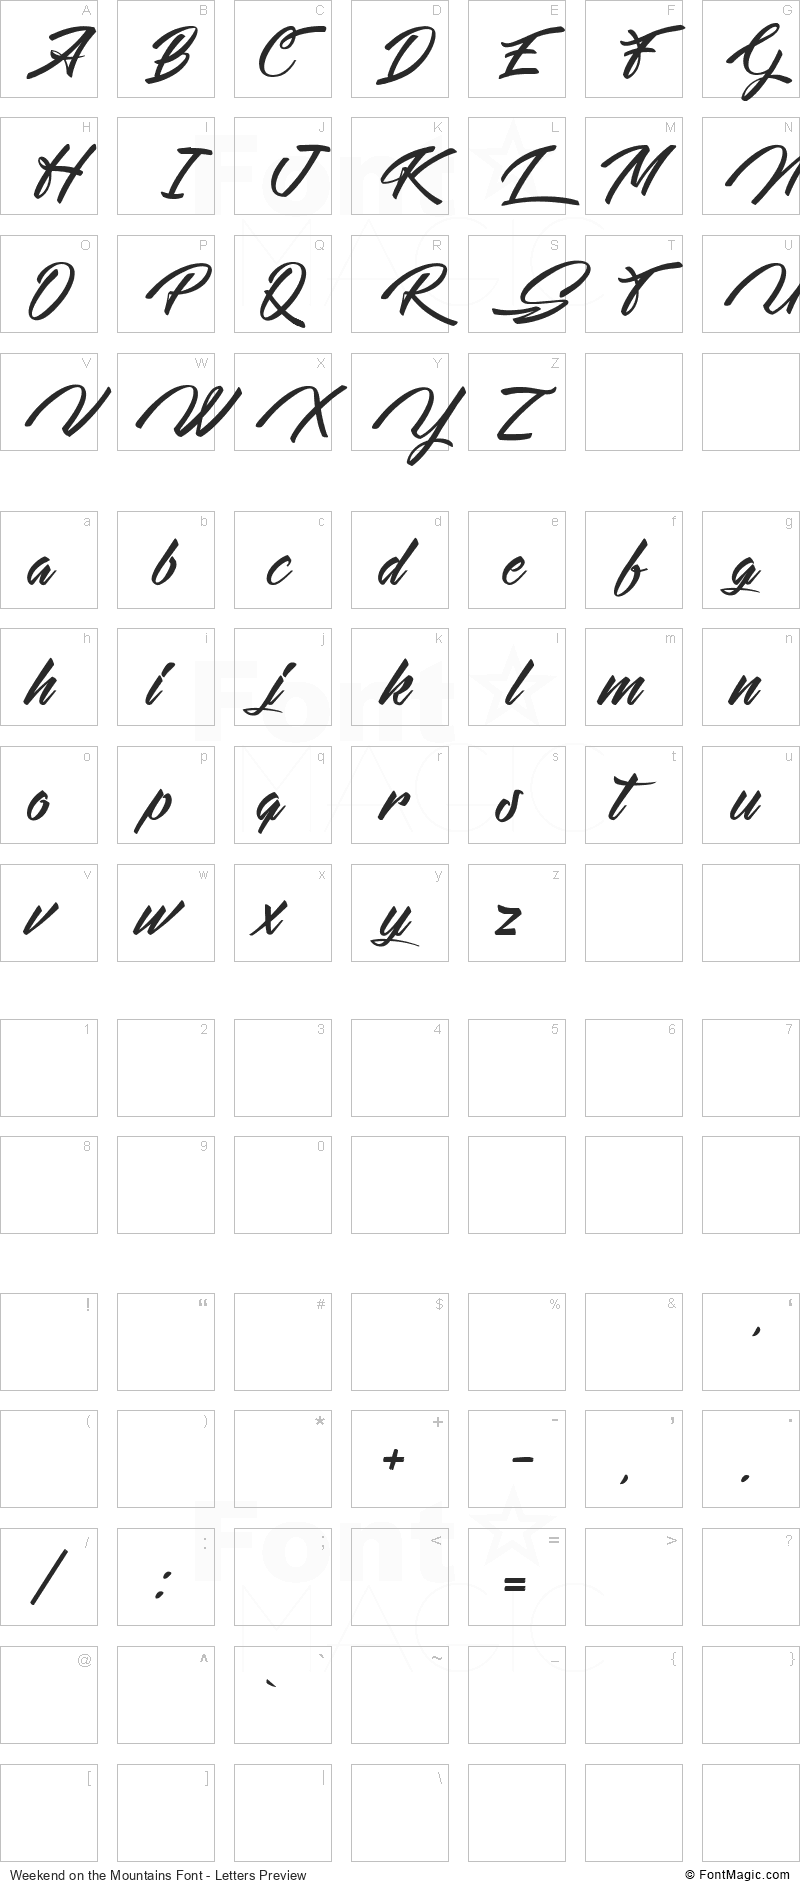 Weekend on the Mountains Font - All Latters Preview Chart